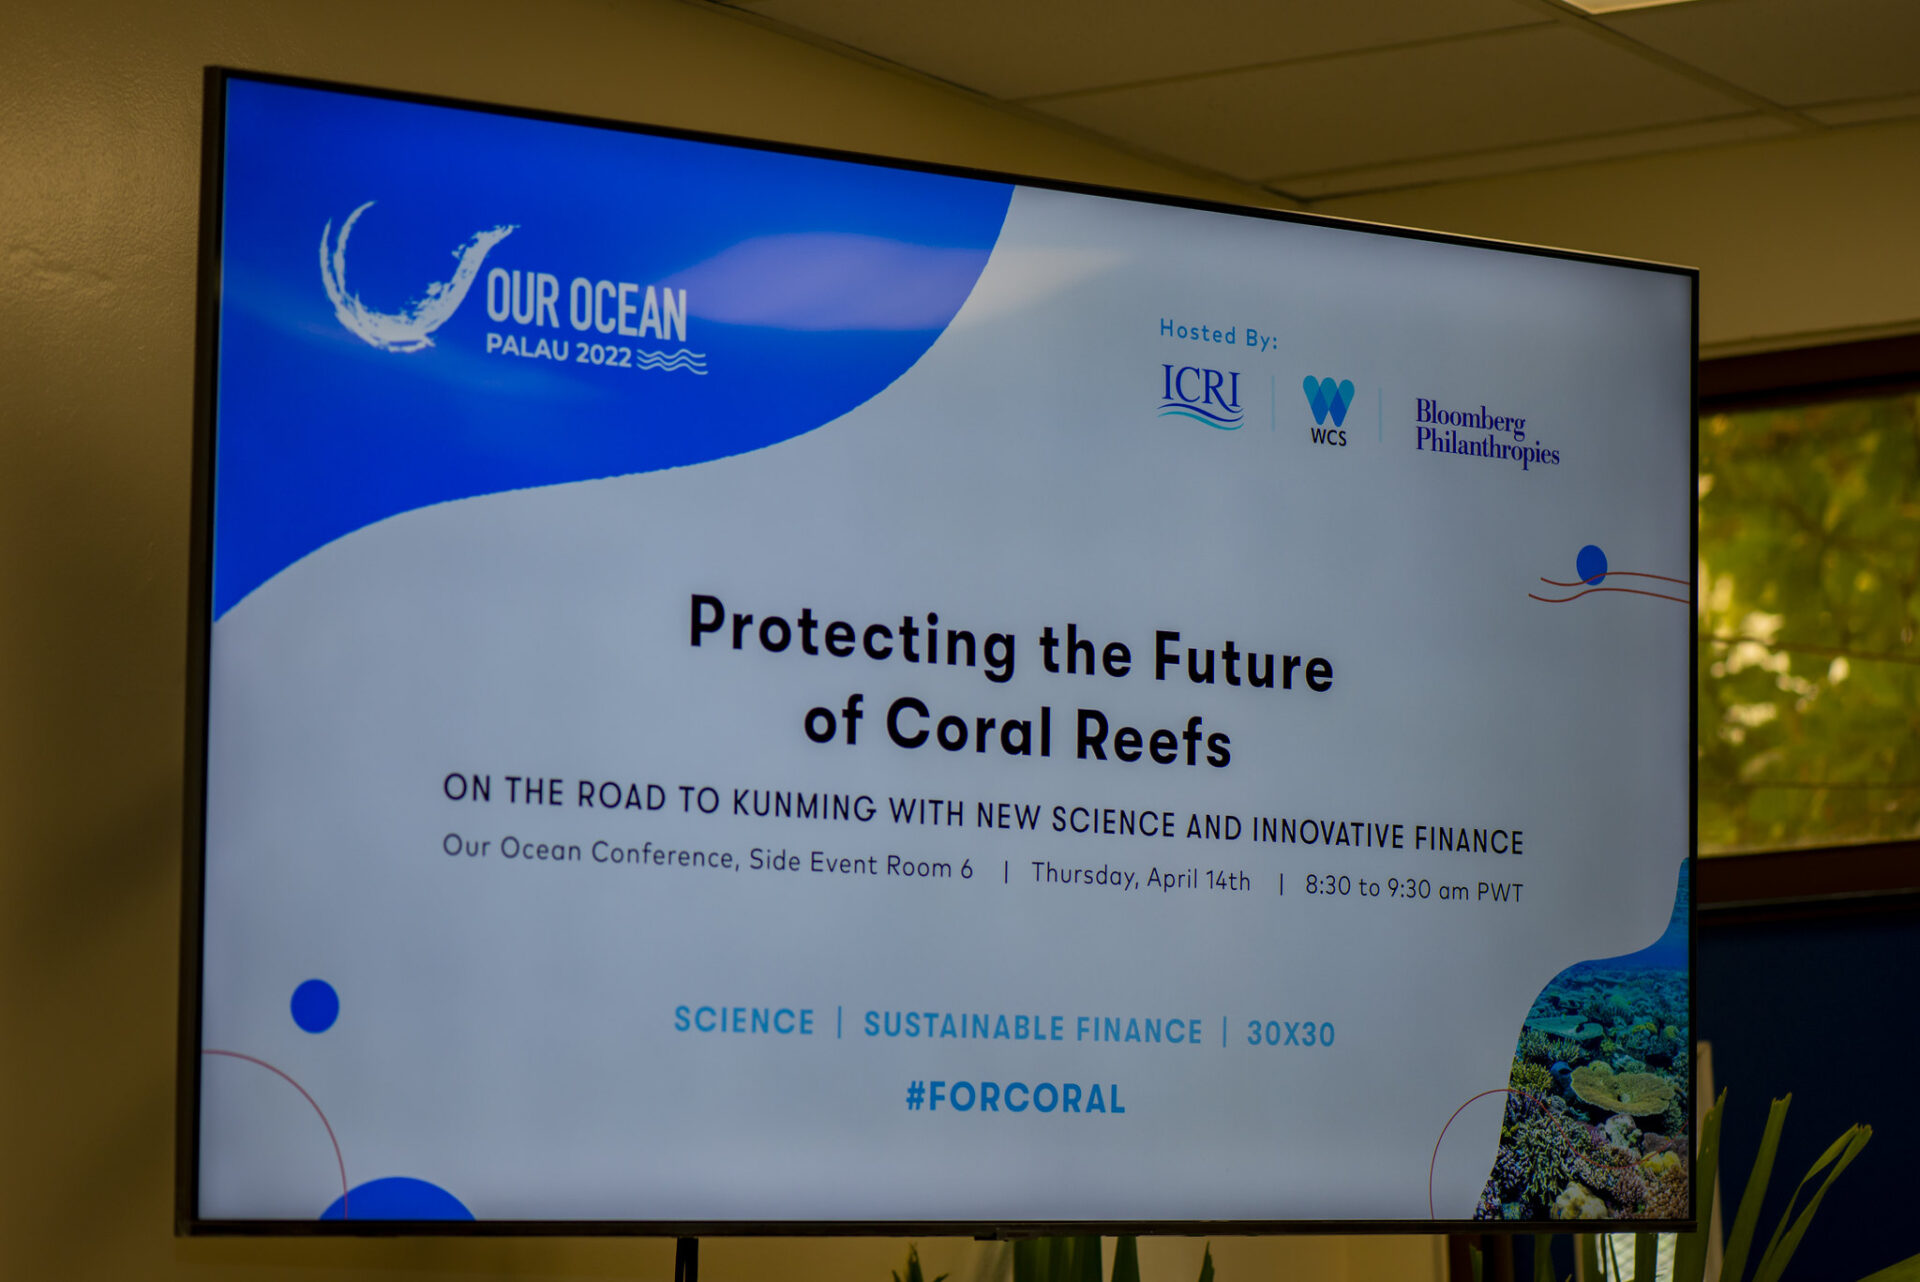 Participants and Delegates at the 7th Our Ocean Conference, hosted by Palau and the United States, On April 14, 2022 in Koror, Palau (Jesse Alpert/U.S. Department of State)